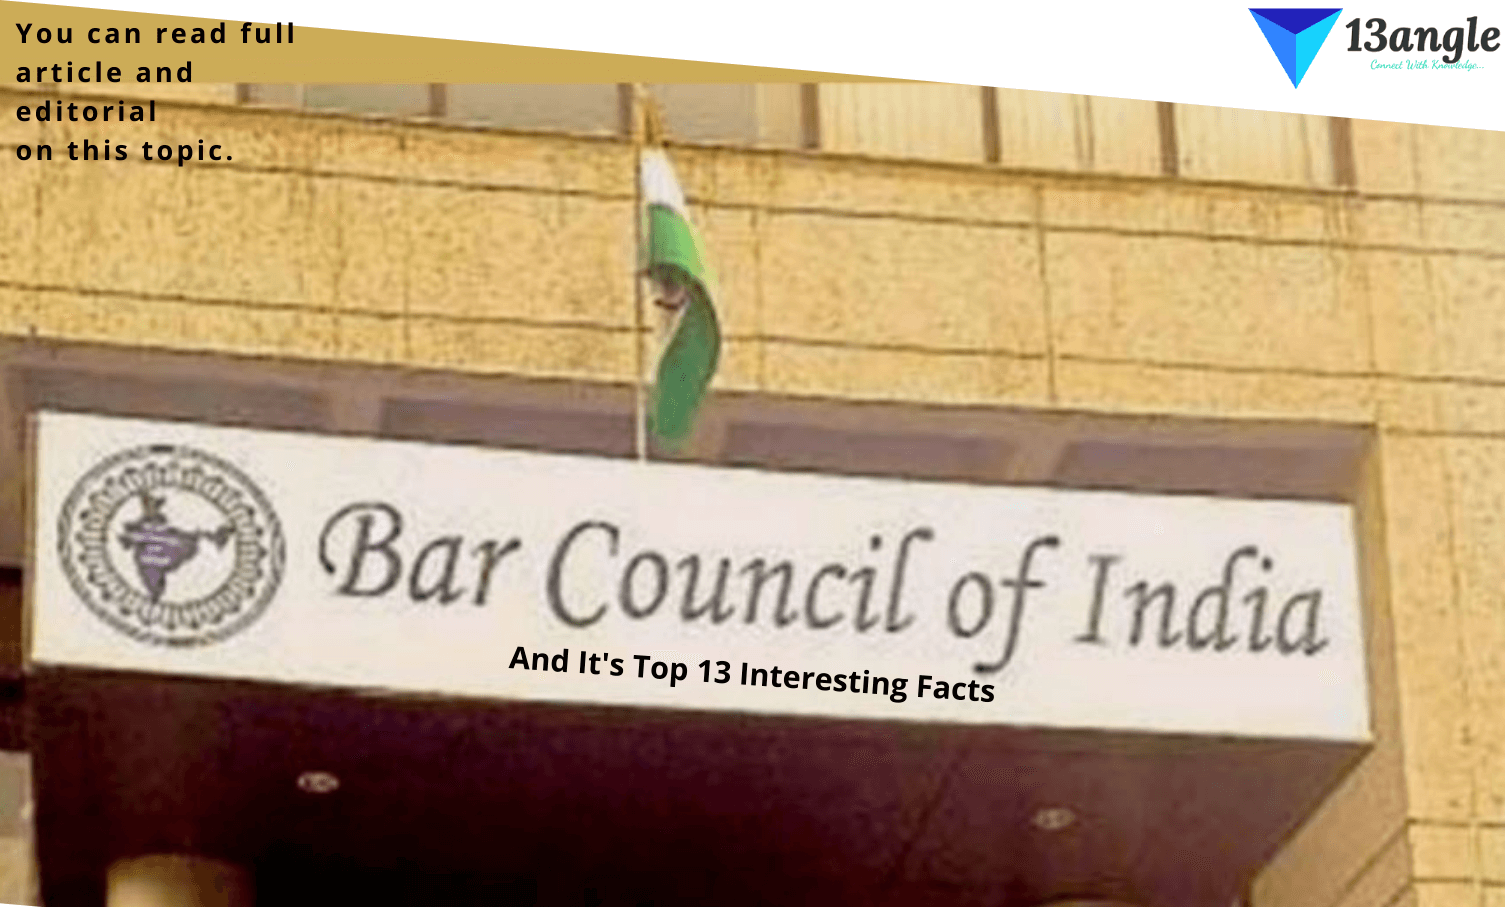 The Bar Council Of India and its top 13 interesting facts- 13angle.com